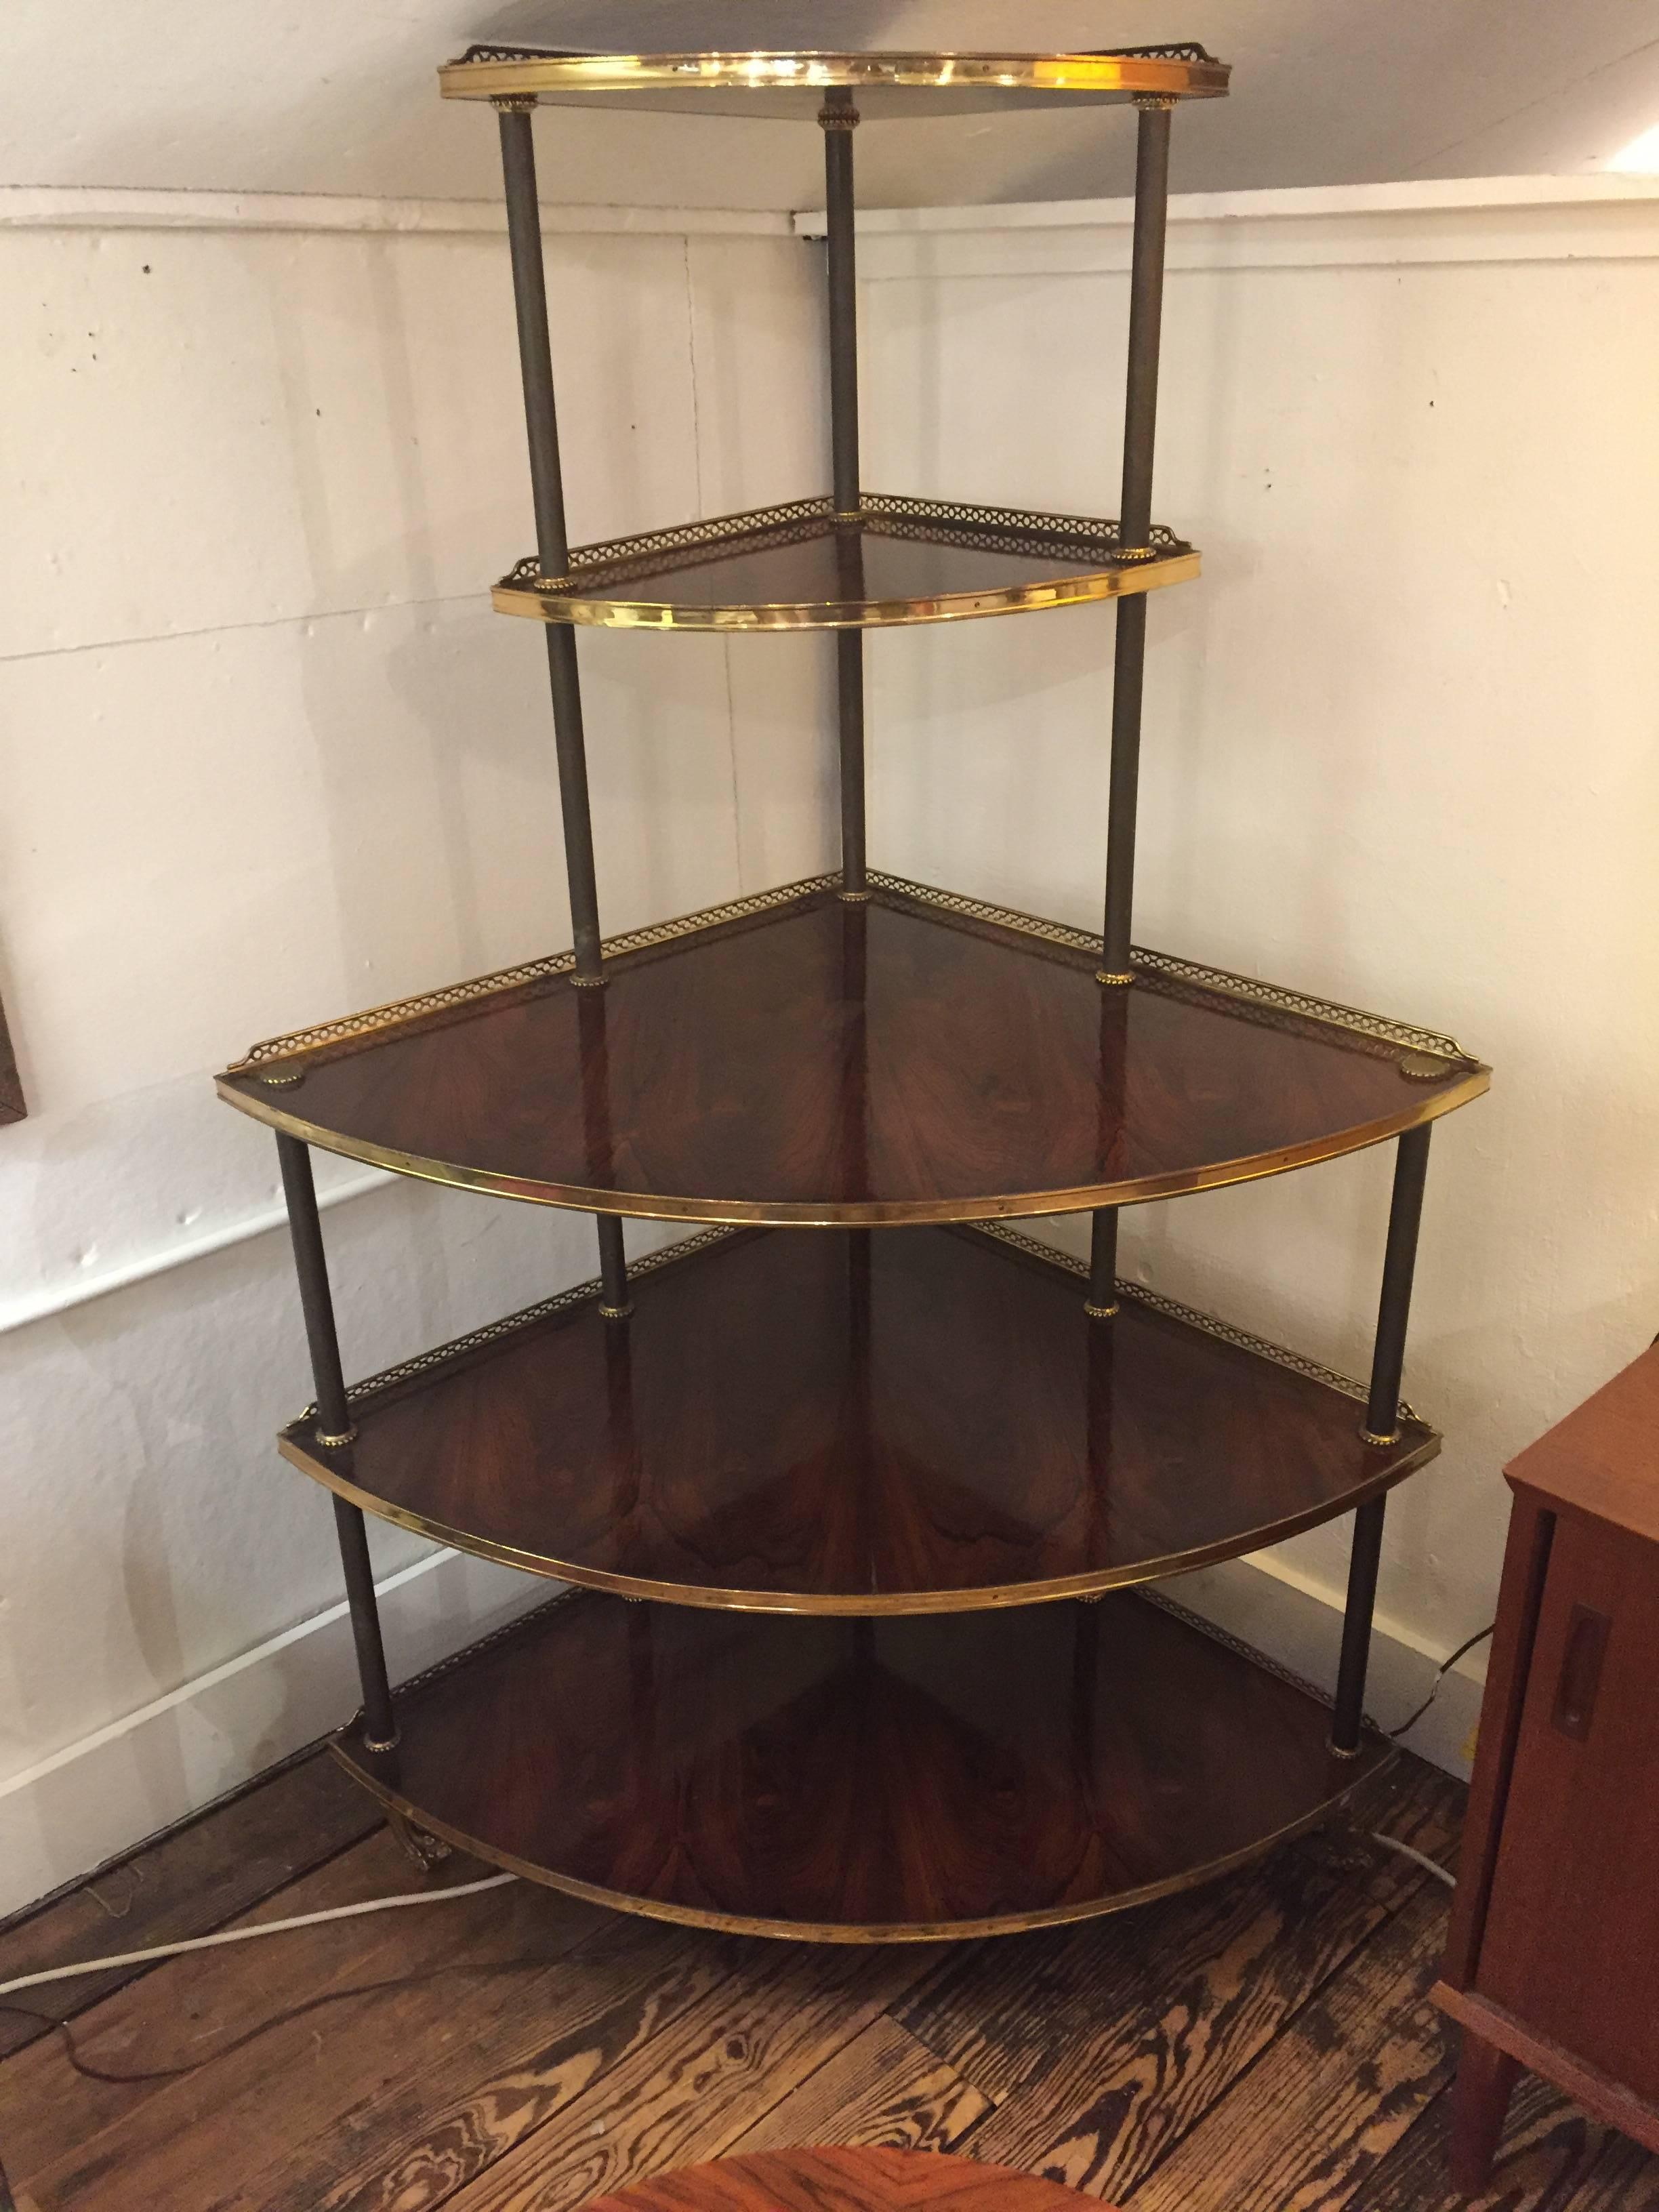 Wonderfully elegant corner shelving display unit having five levels of mahogany tiers framed with brass galleries and lovely columnar structure finished with handsome brass feet. Great for displaying or using as a server in a dining